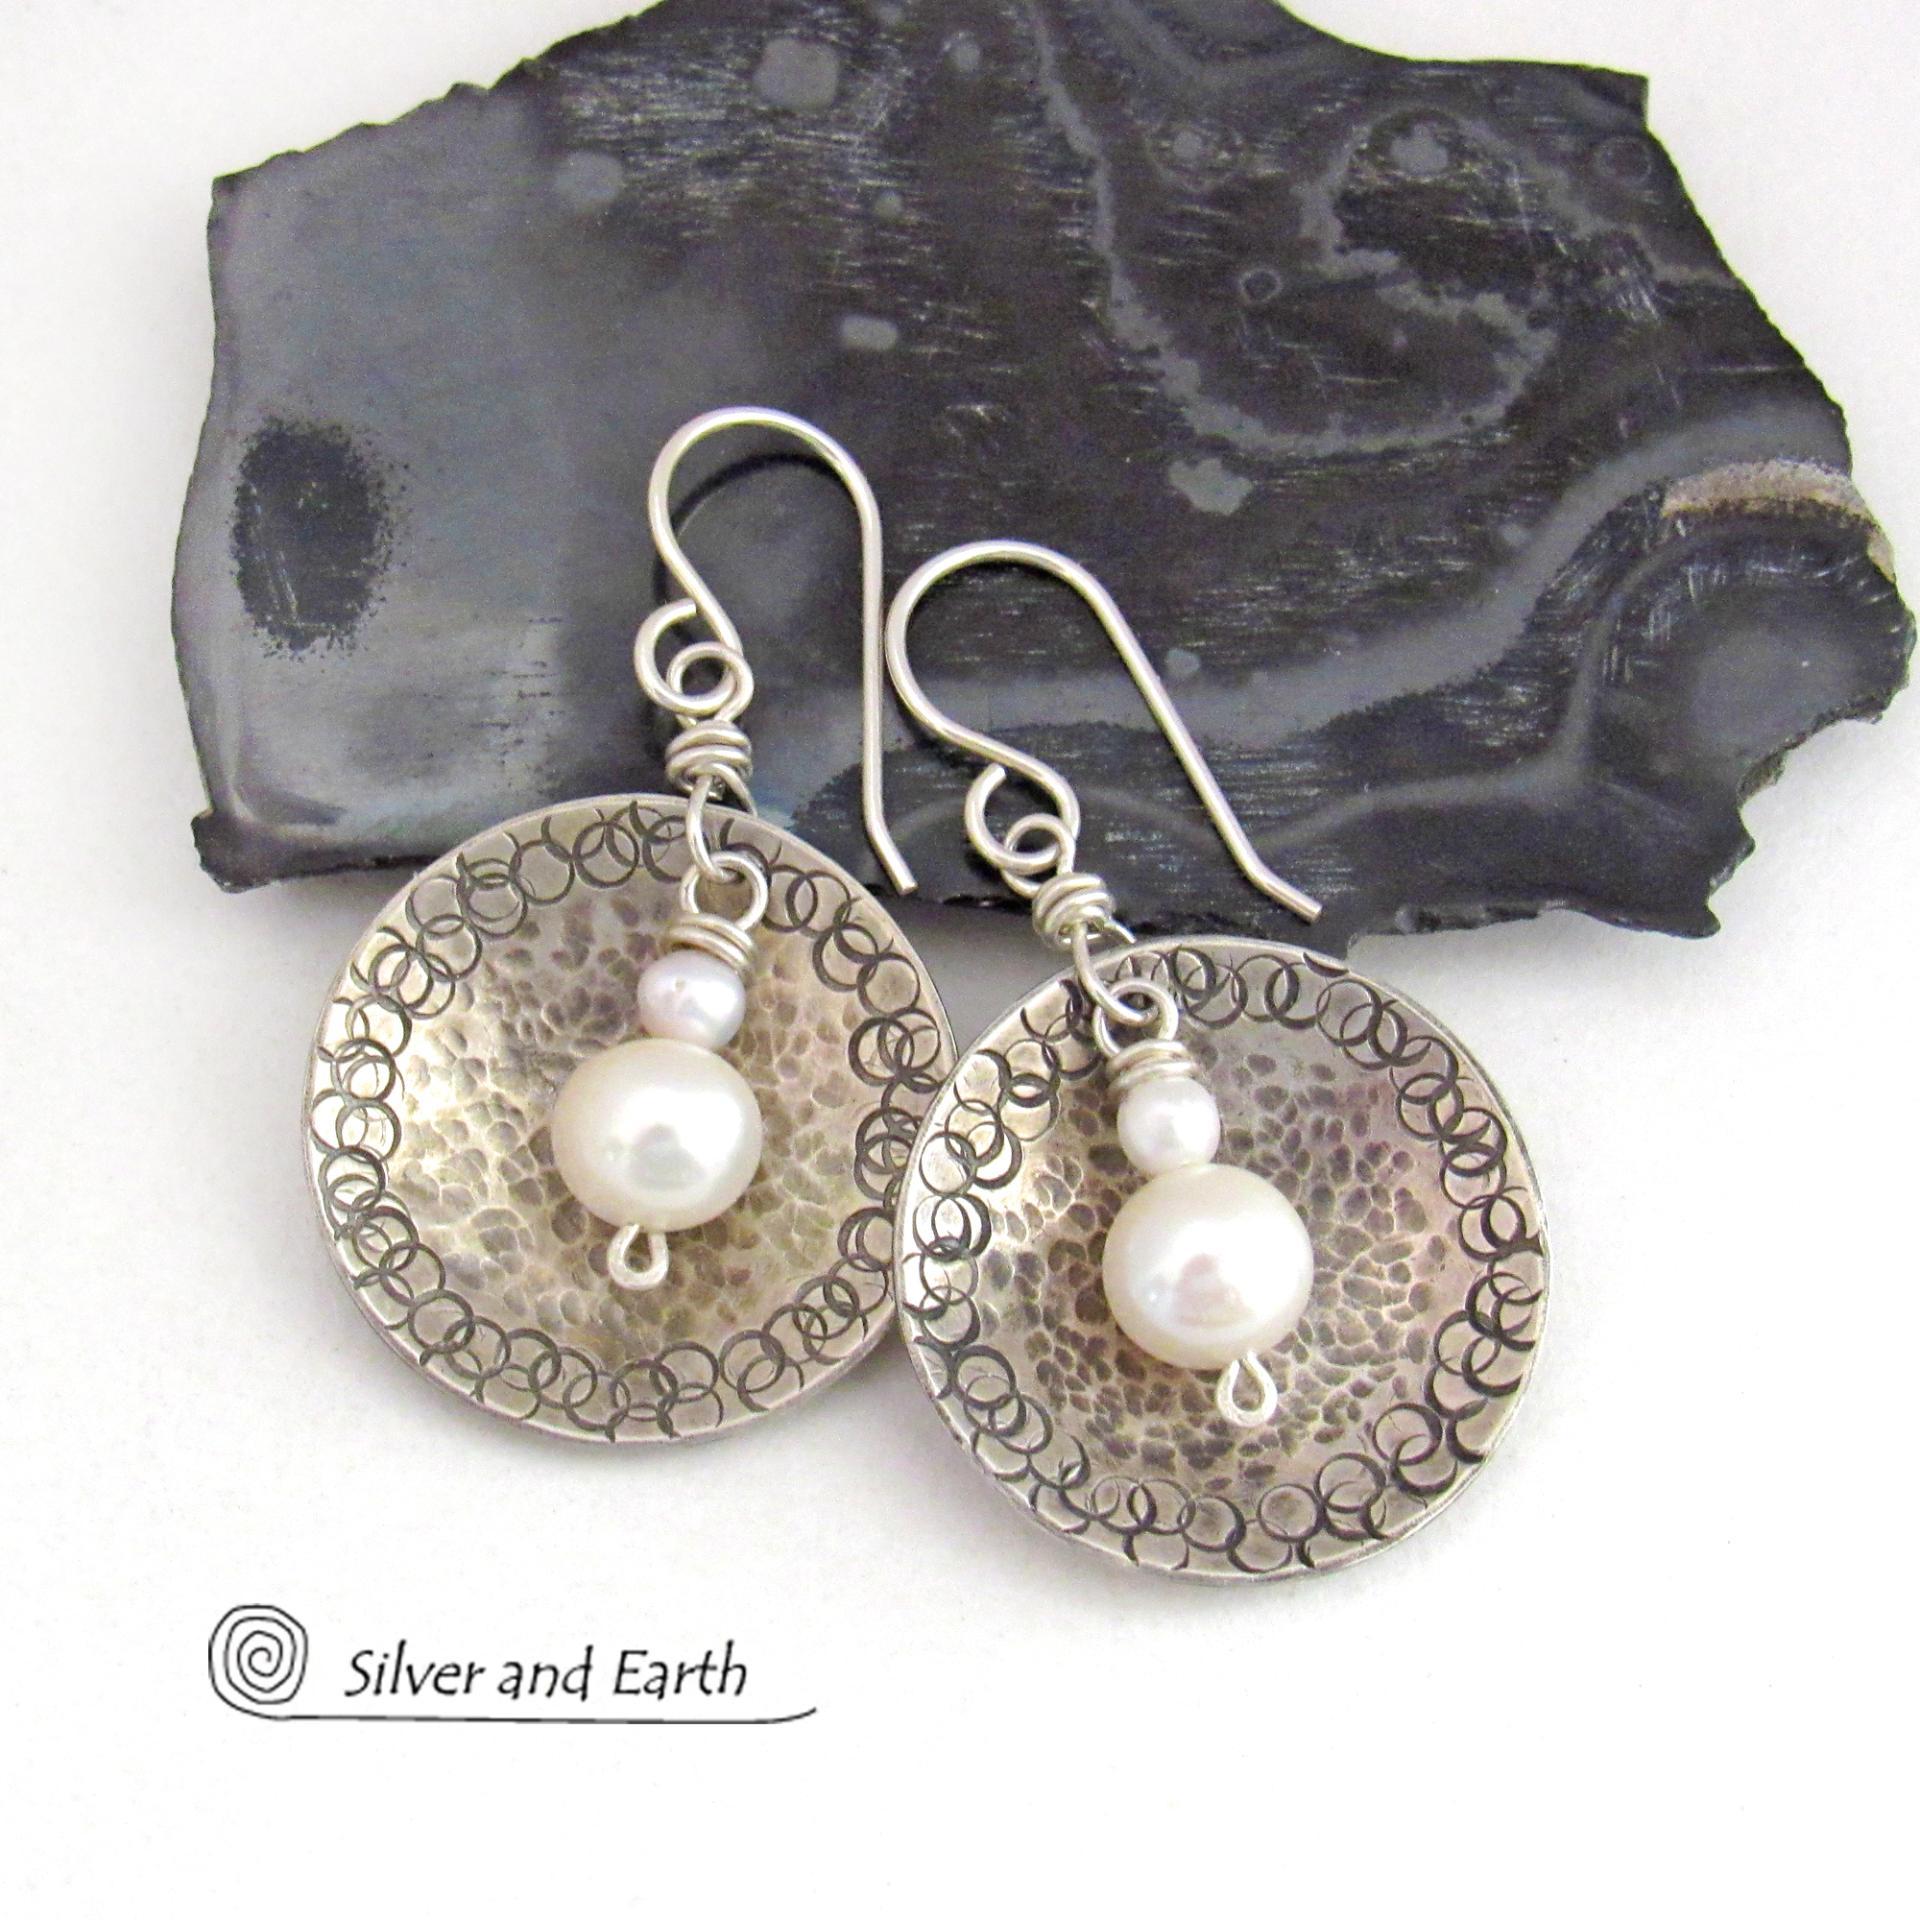 Small Sterling Silver Earrings with Dangling White Pearls - Modern Silver Jewelry